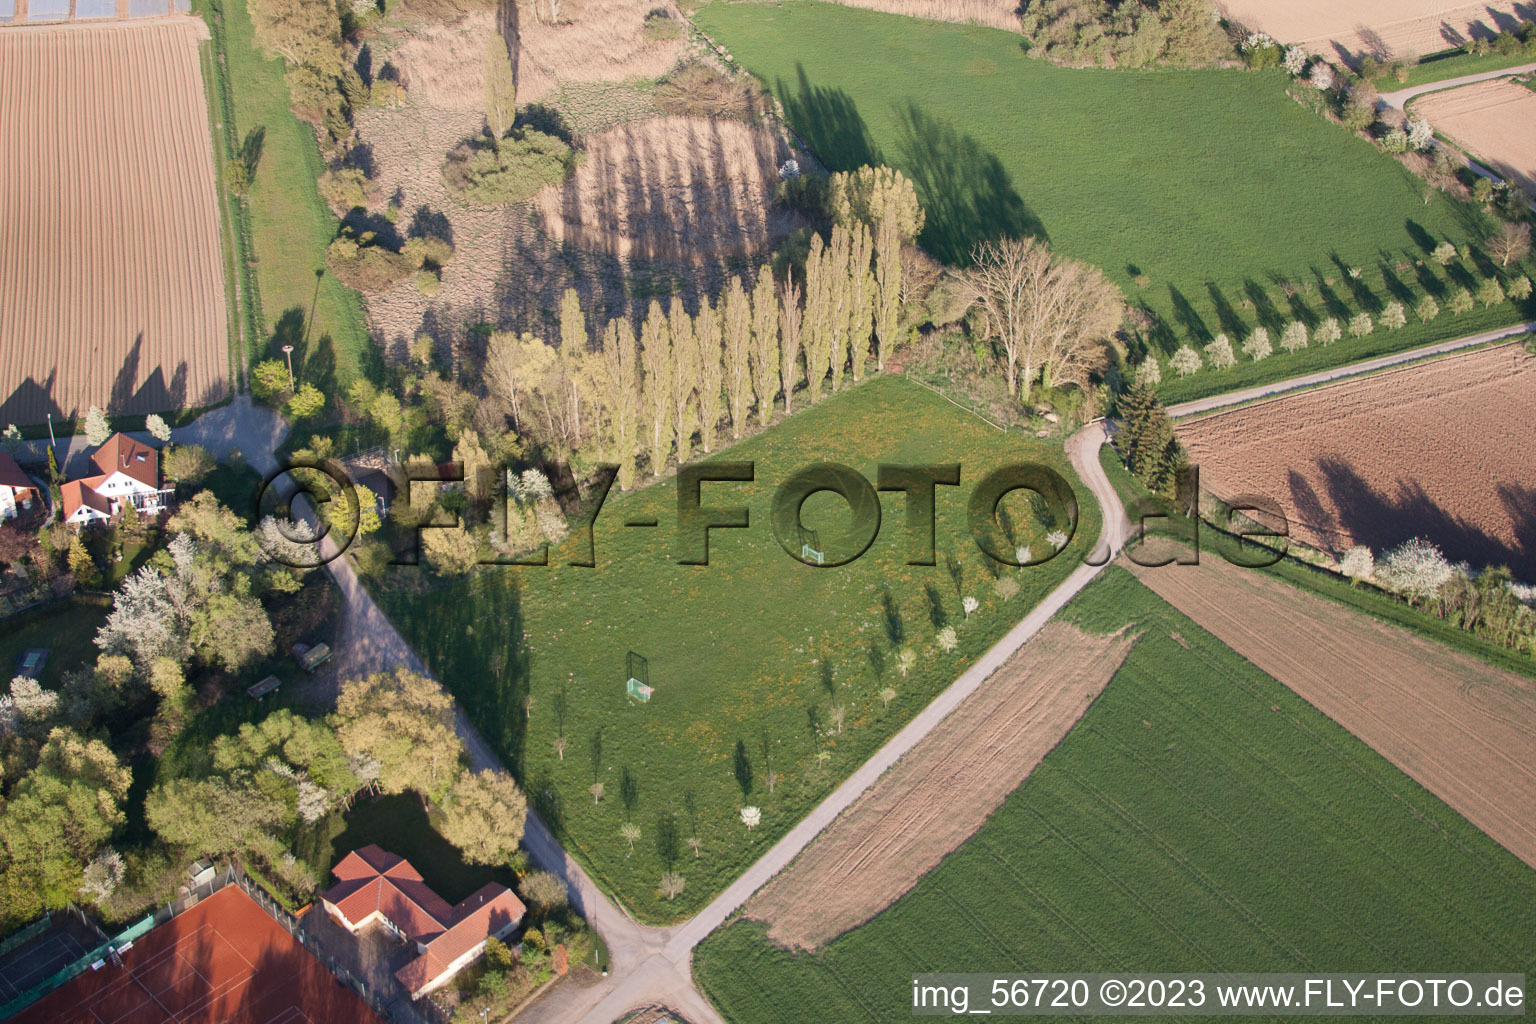 Kleinfischlingen in the state Rhineland-Palatinate, Germany out of the air